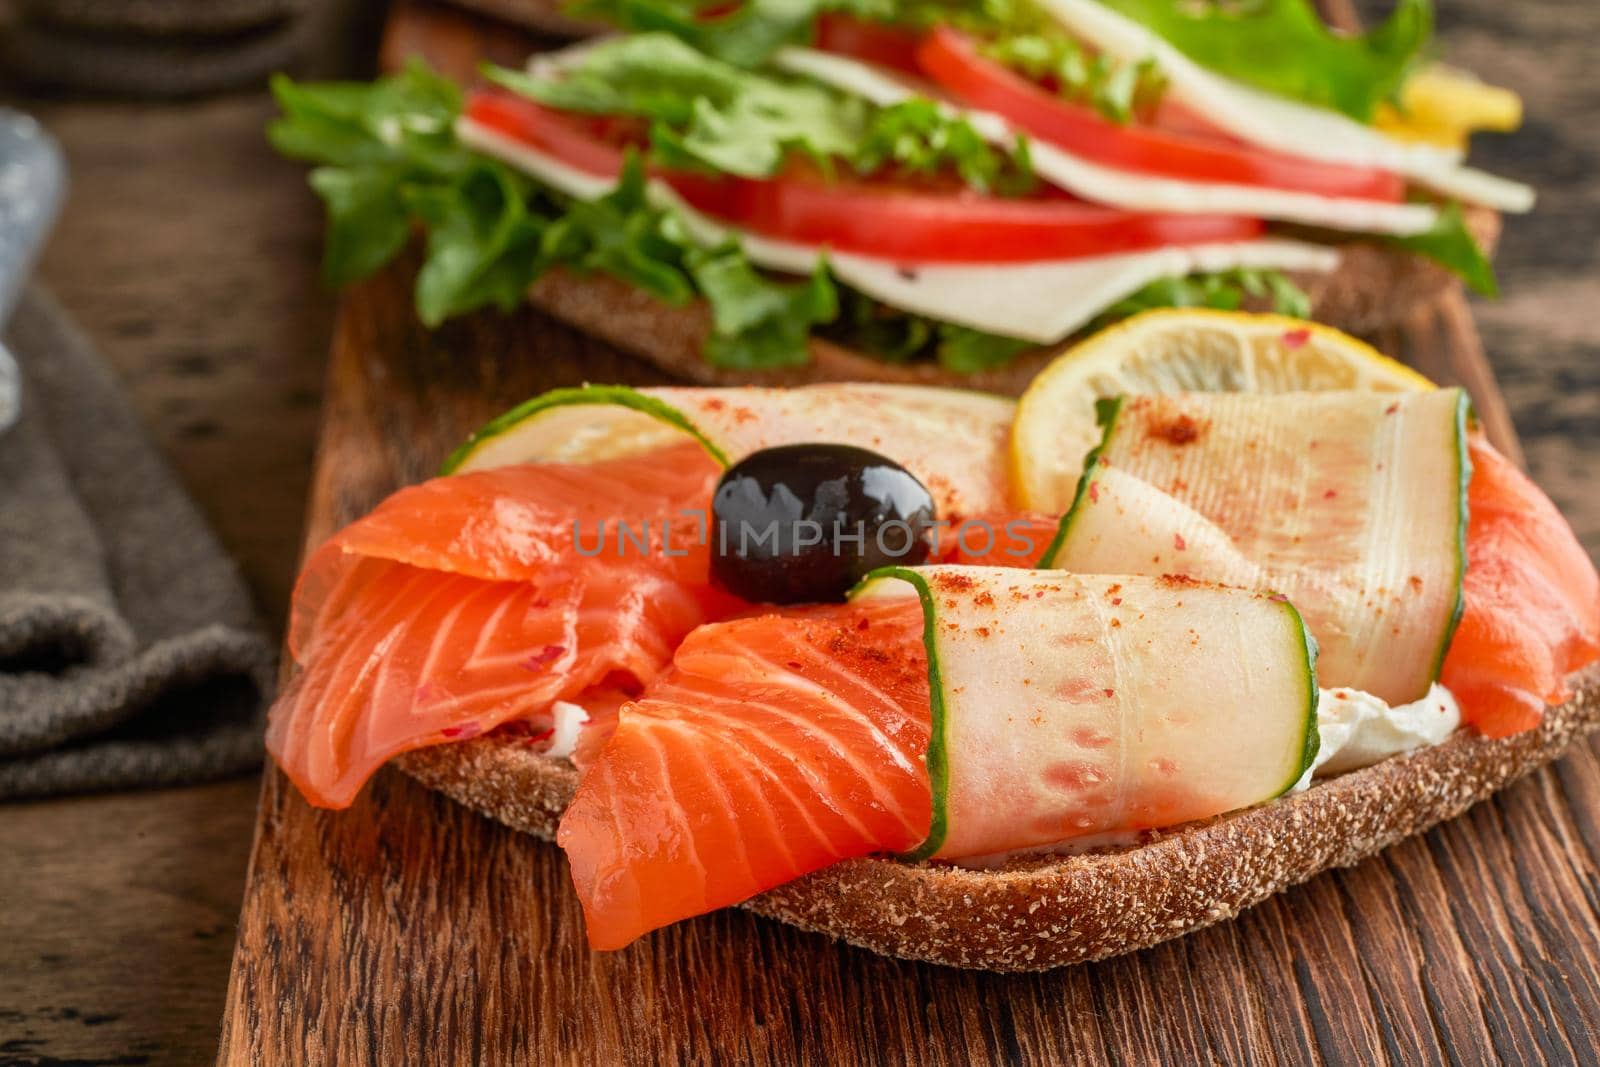 Smorrebrod - traditional Danish sandwiches. Black rye bread with salmon, cream cheese, cucumber and olives on dark brown wooden background